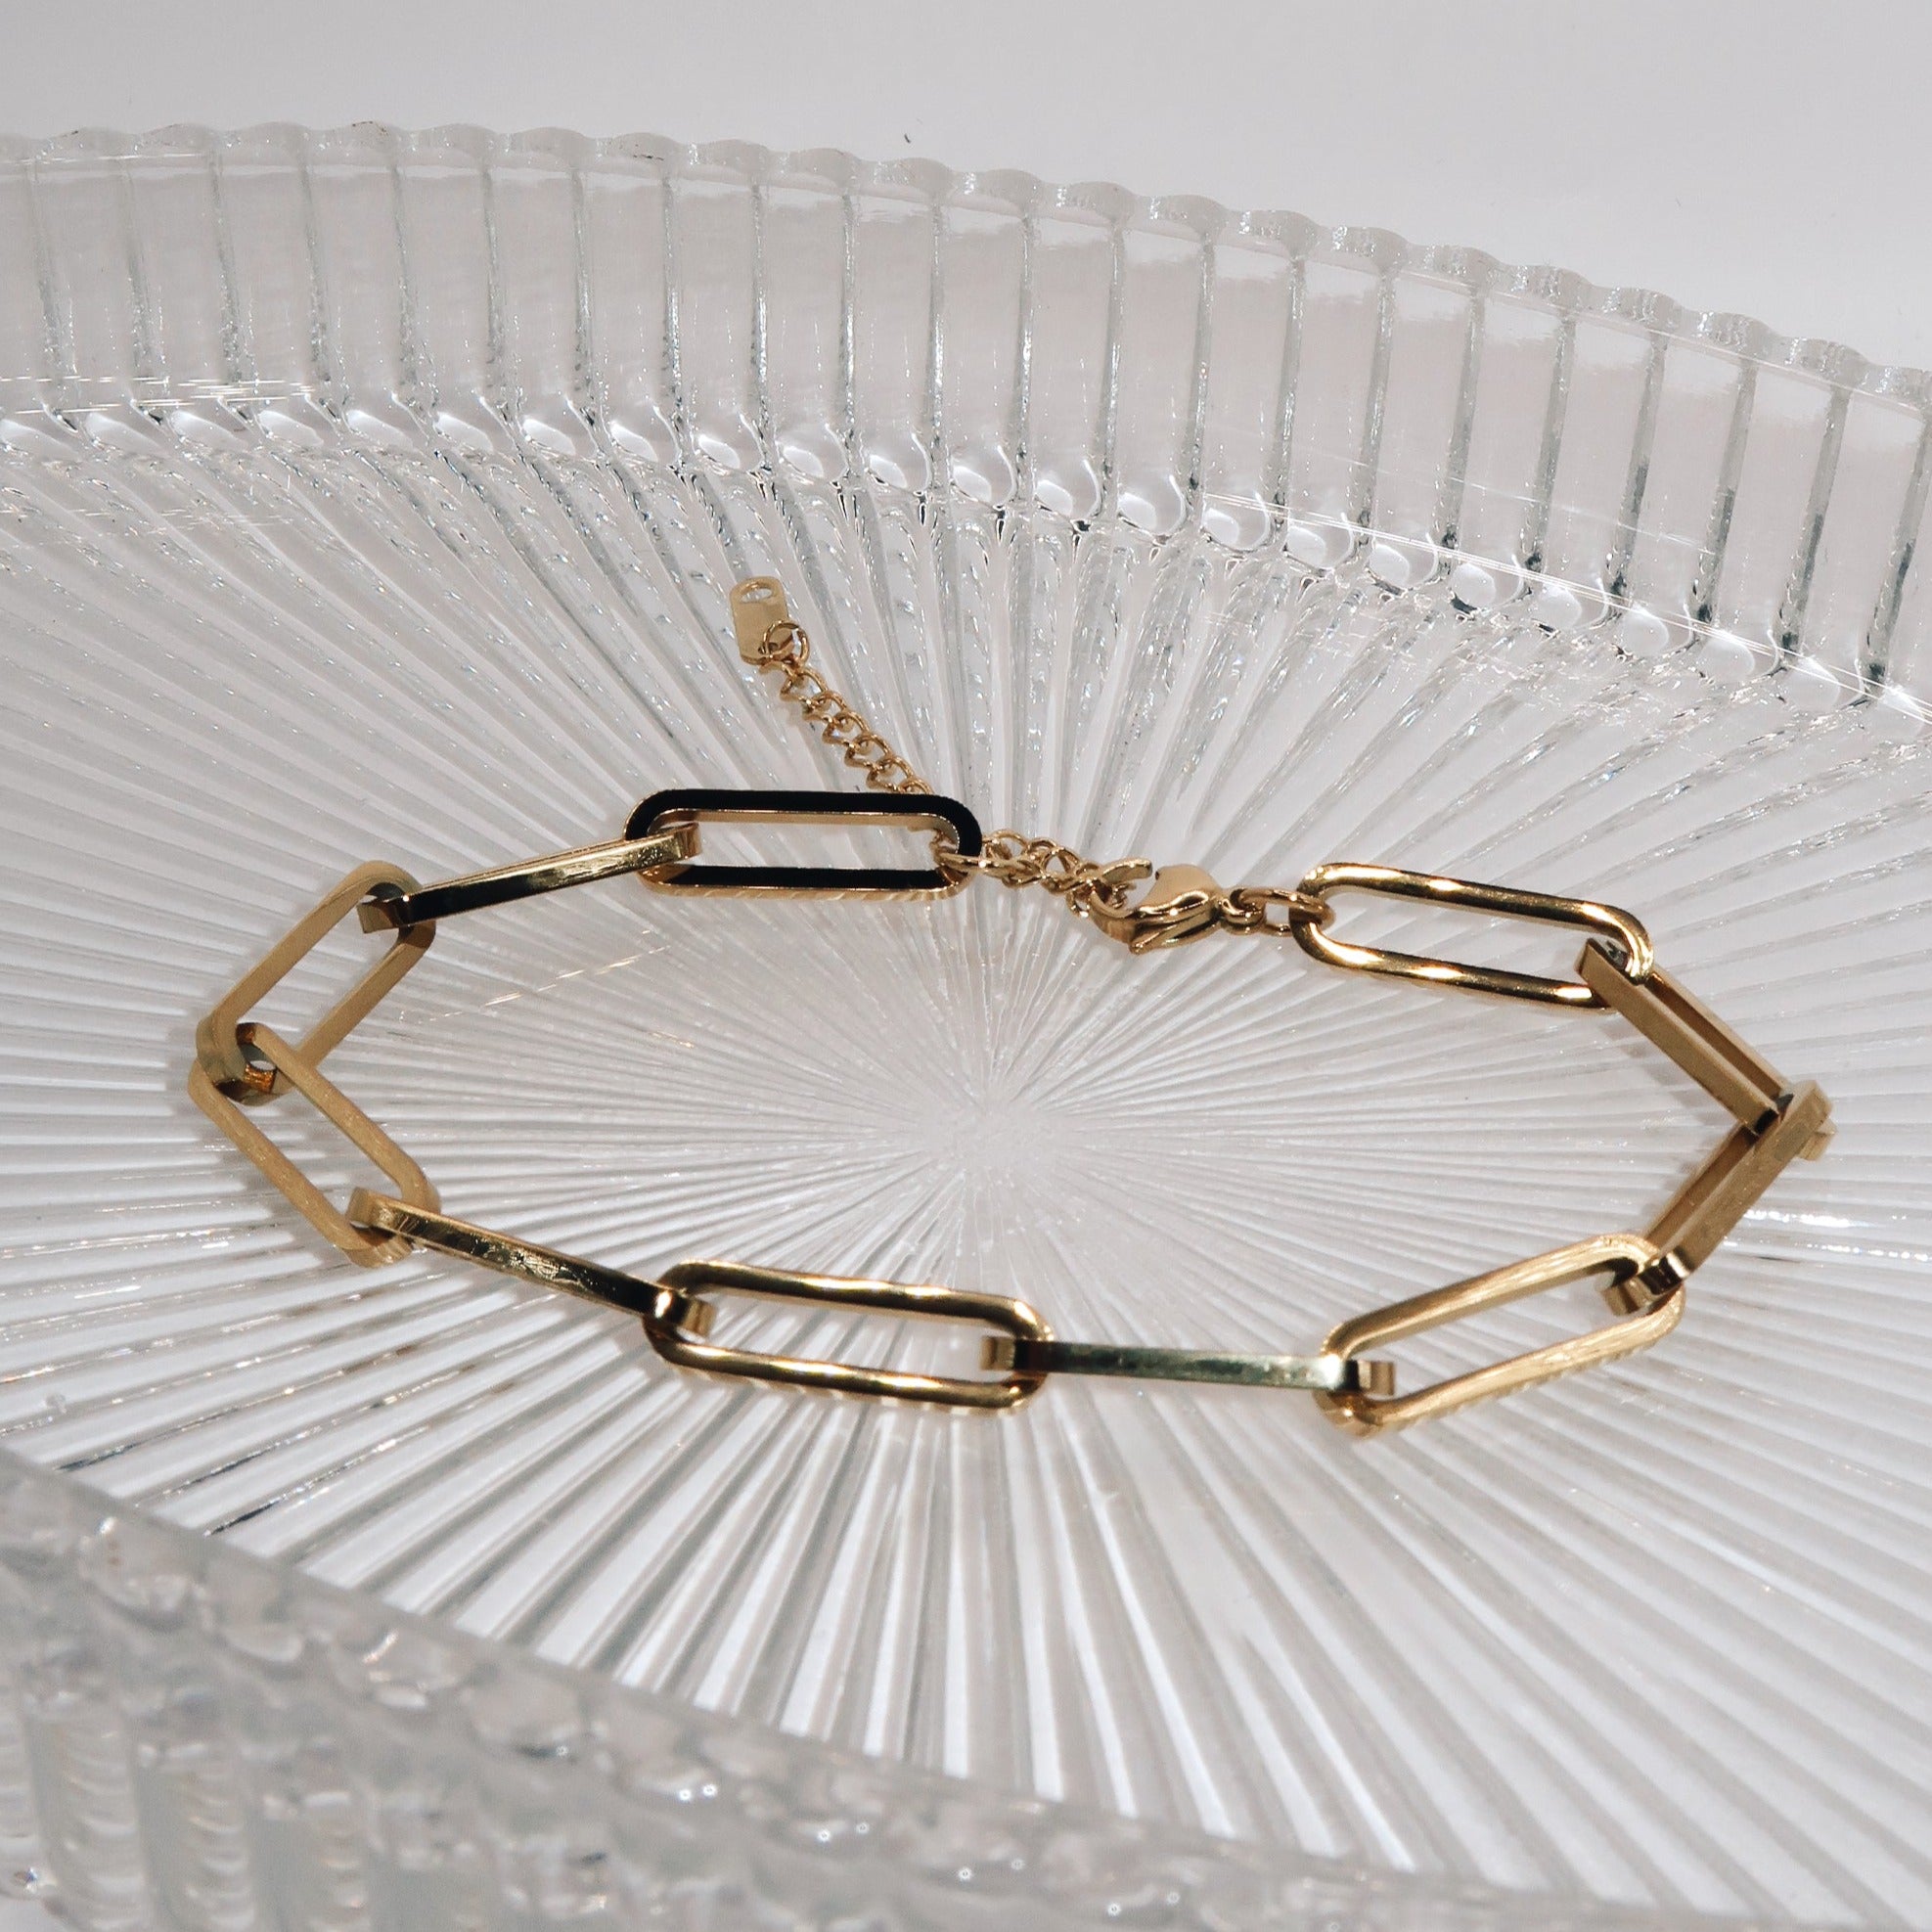 CALI - 18K PVD Gold Plated Long Link Bracelet - Mixed Metals